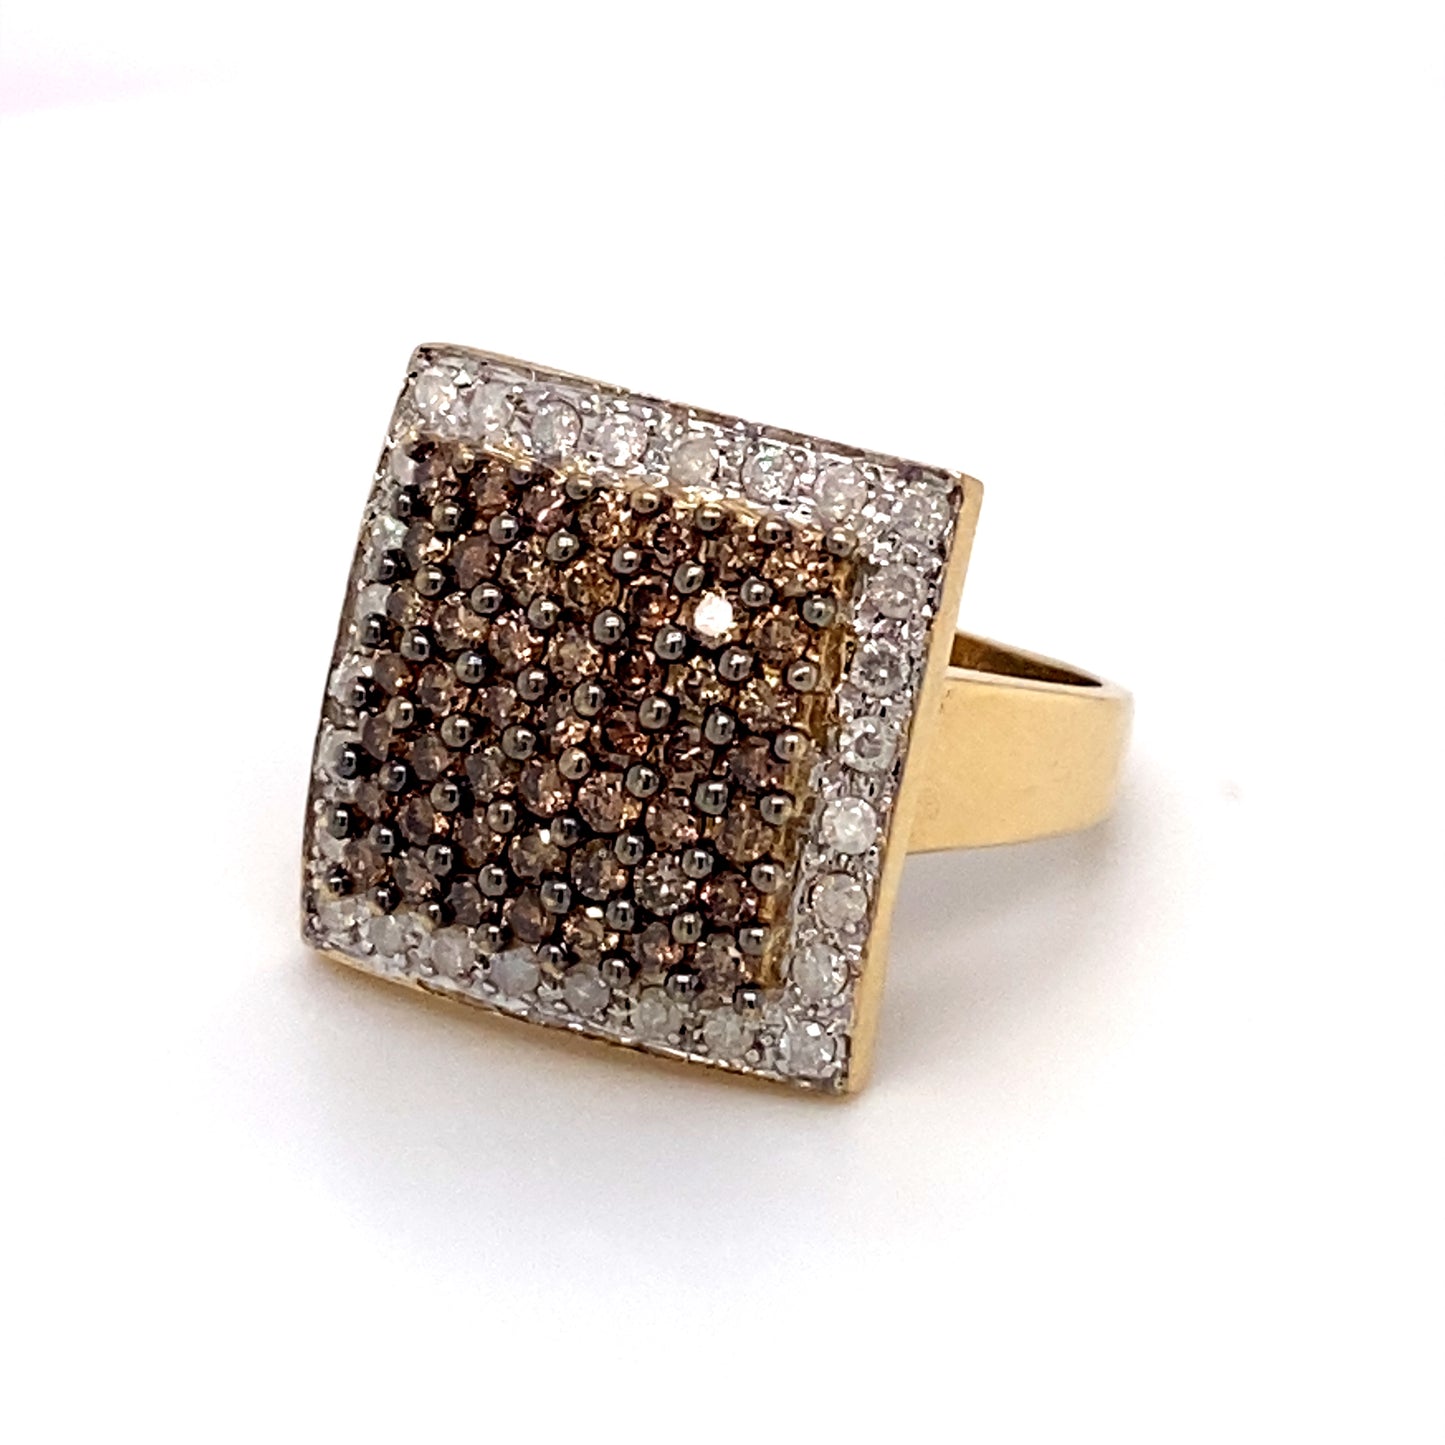 Vintage White and Brown Diamond Square Ring in 10K Gold